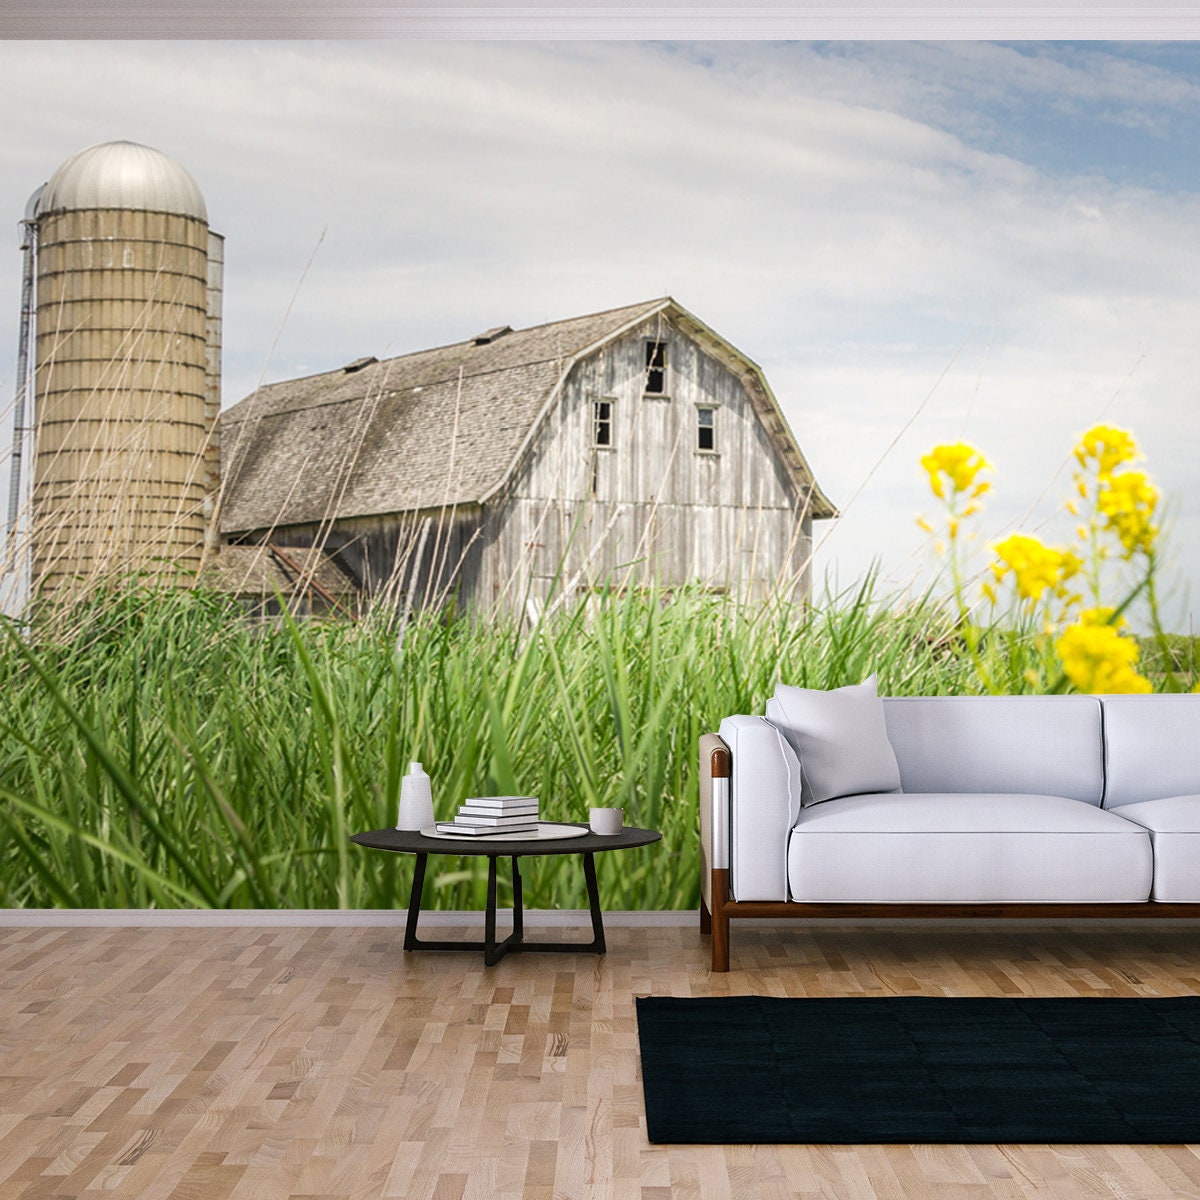 Beautiful Field Photo with Rustic Barn Resting in a Field of Grass Wallpaper Living Room Mural